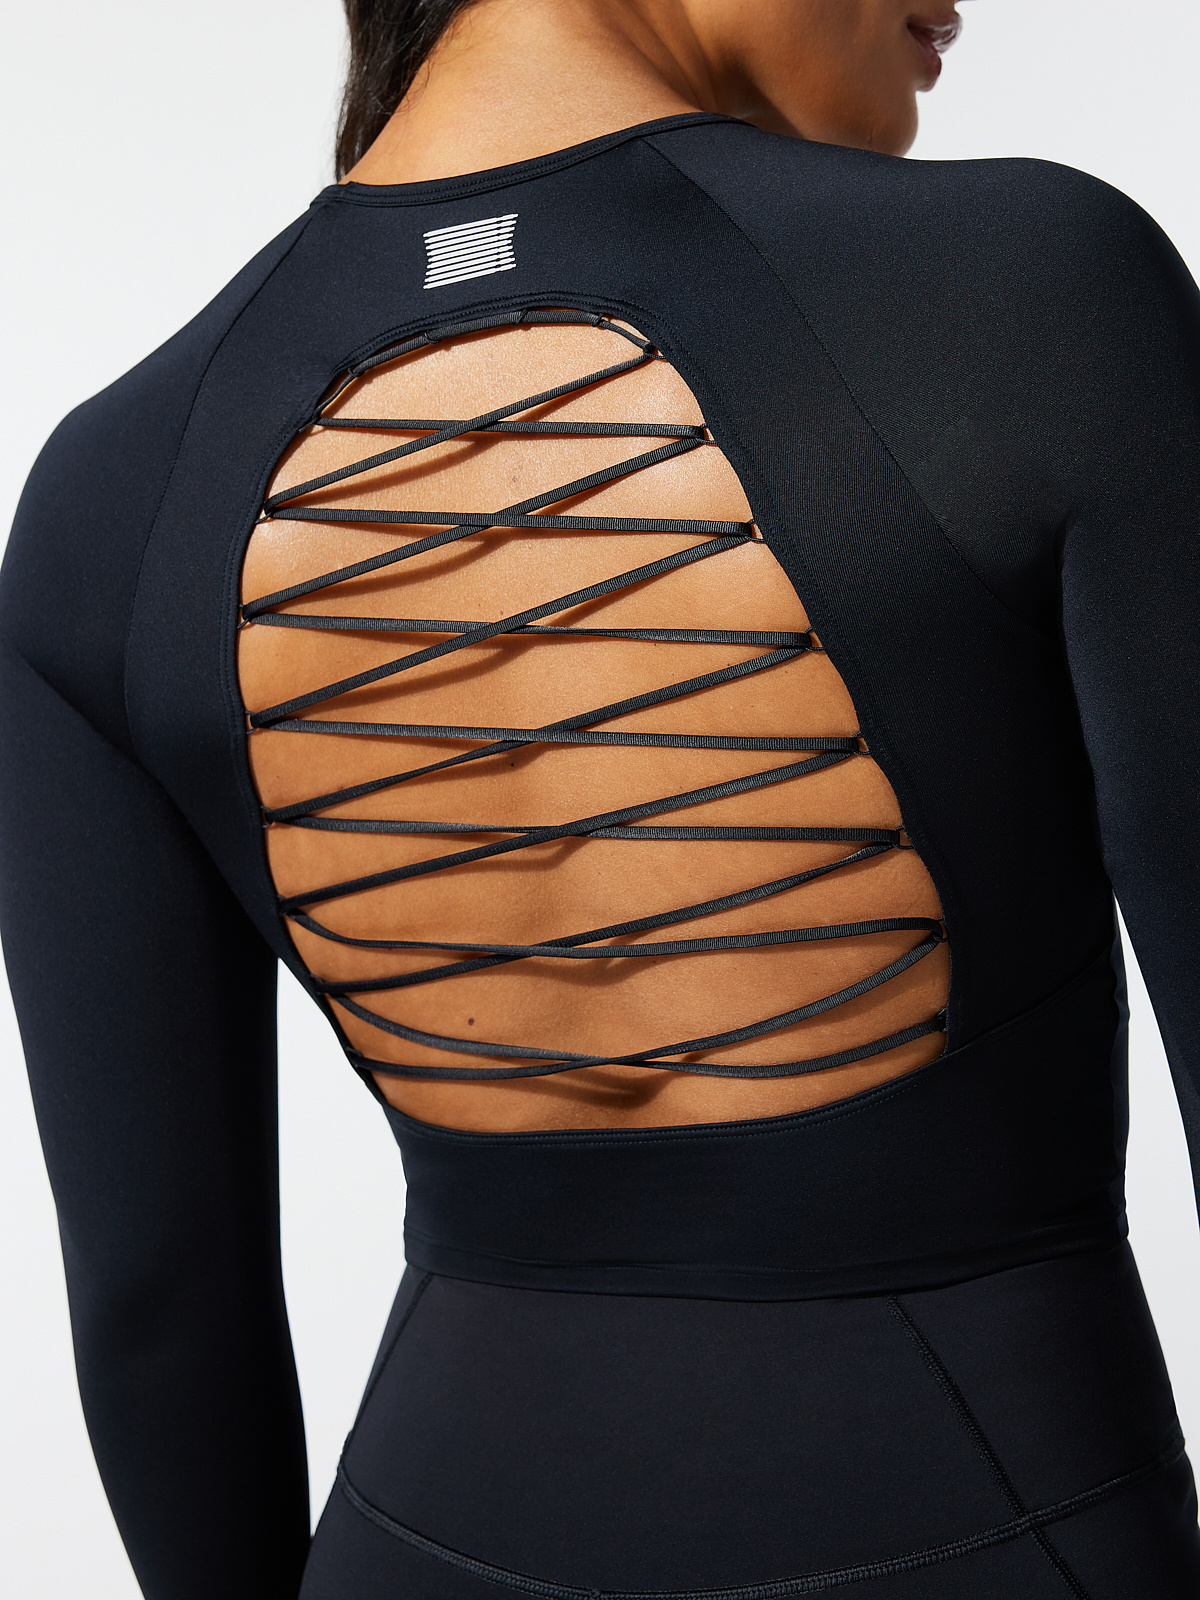 Lace Up Open-Back Long-Sleeve Top in Black | SAVAGE X FENTY UK United ...